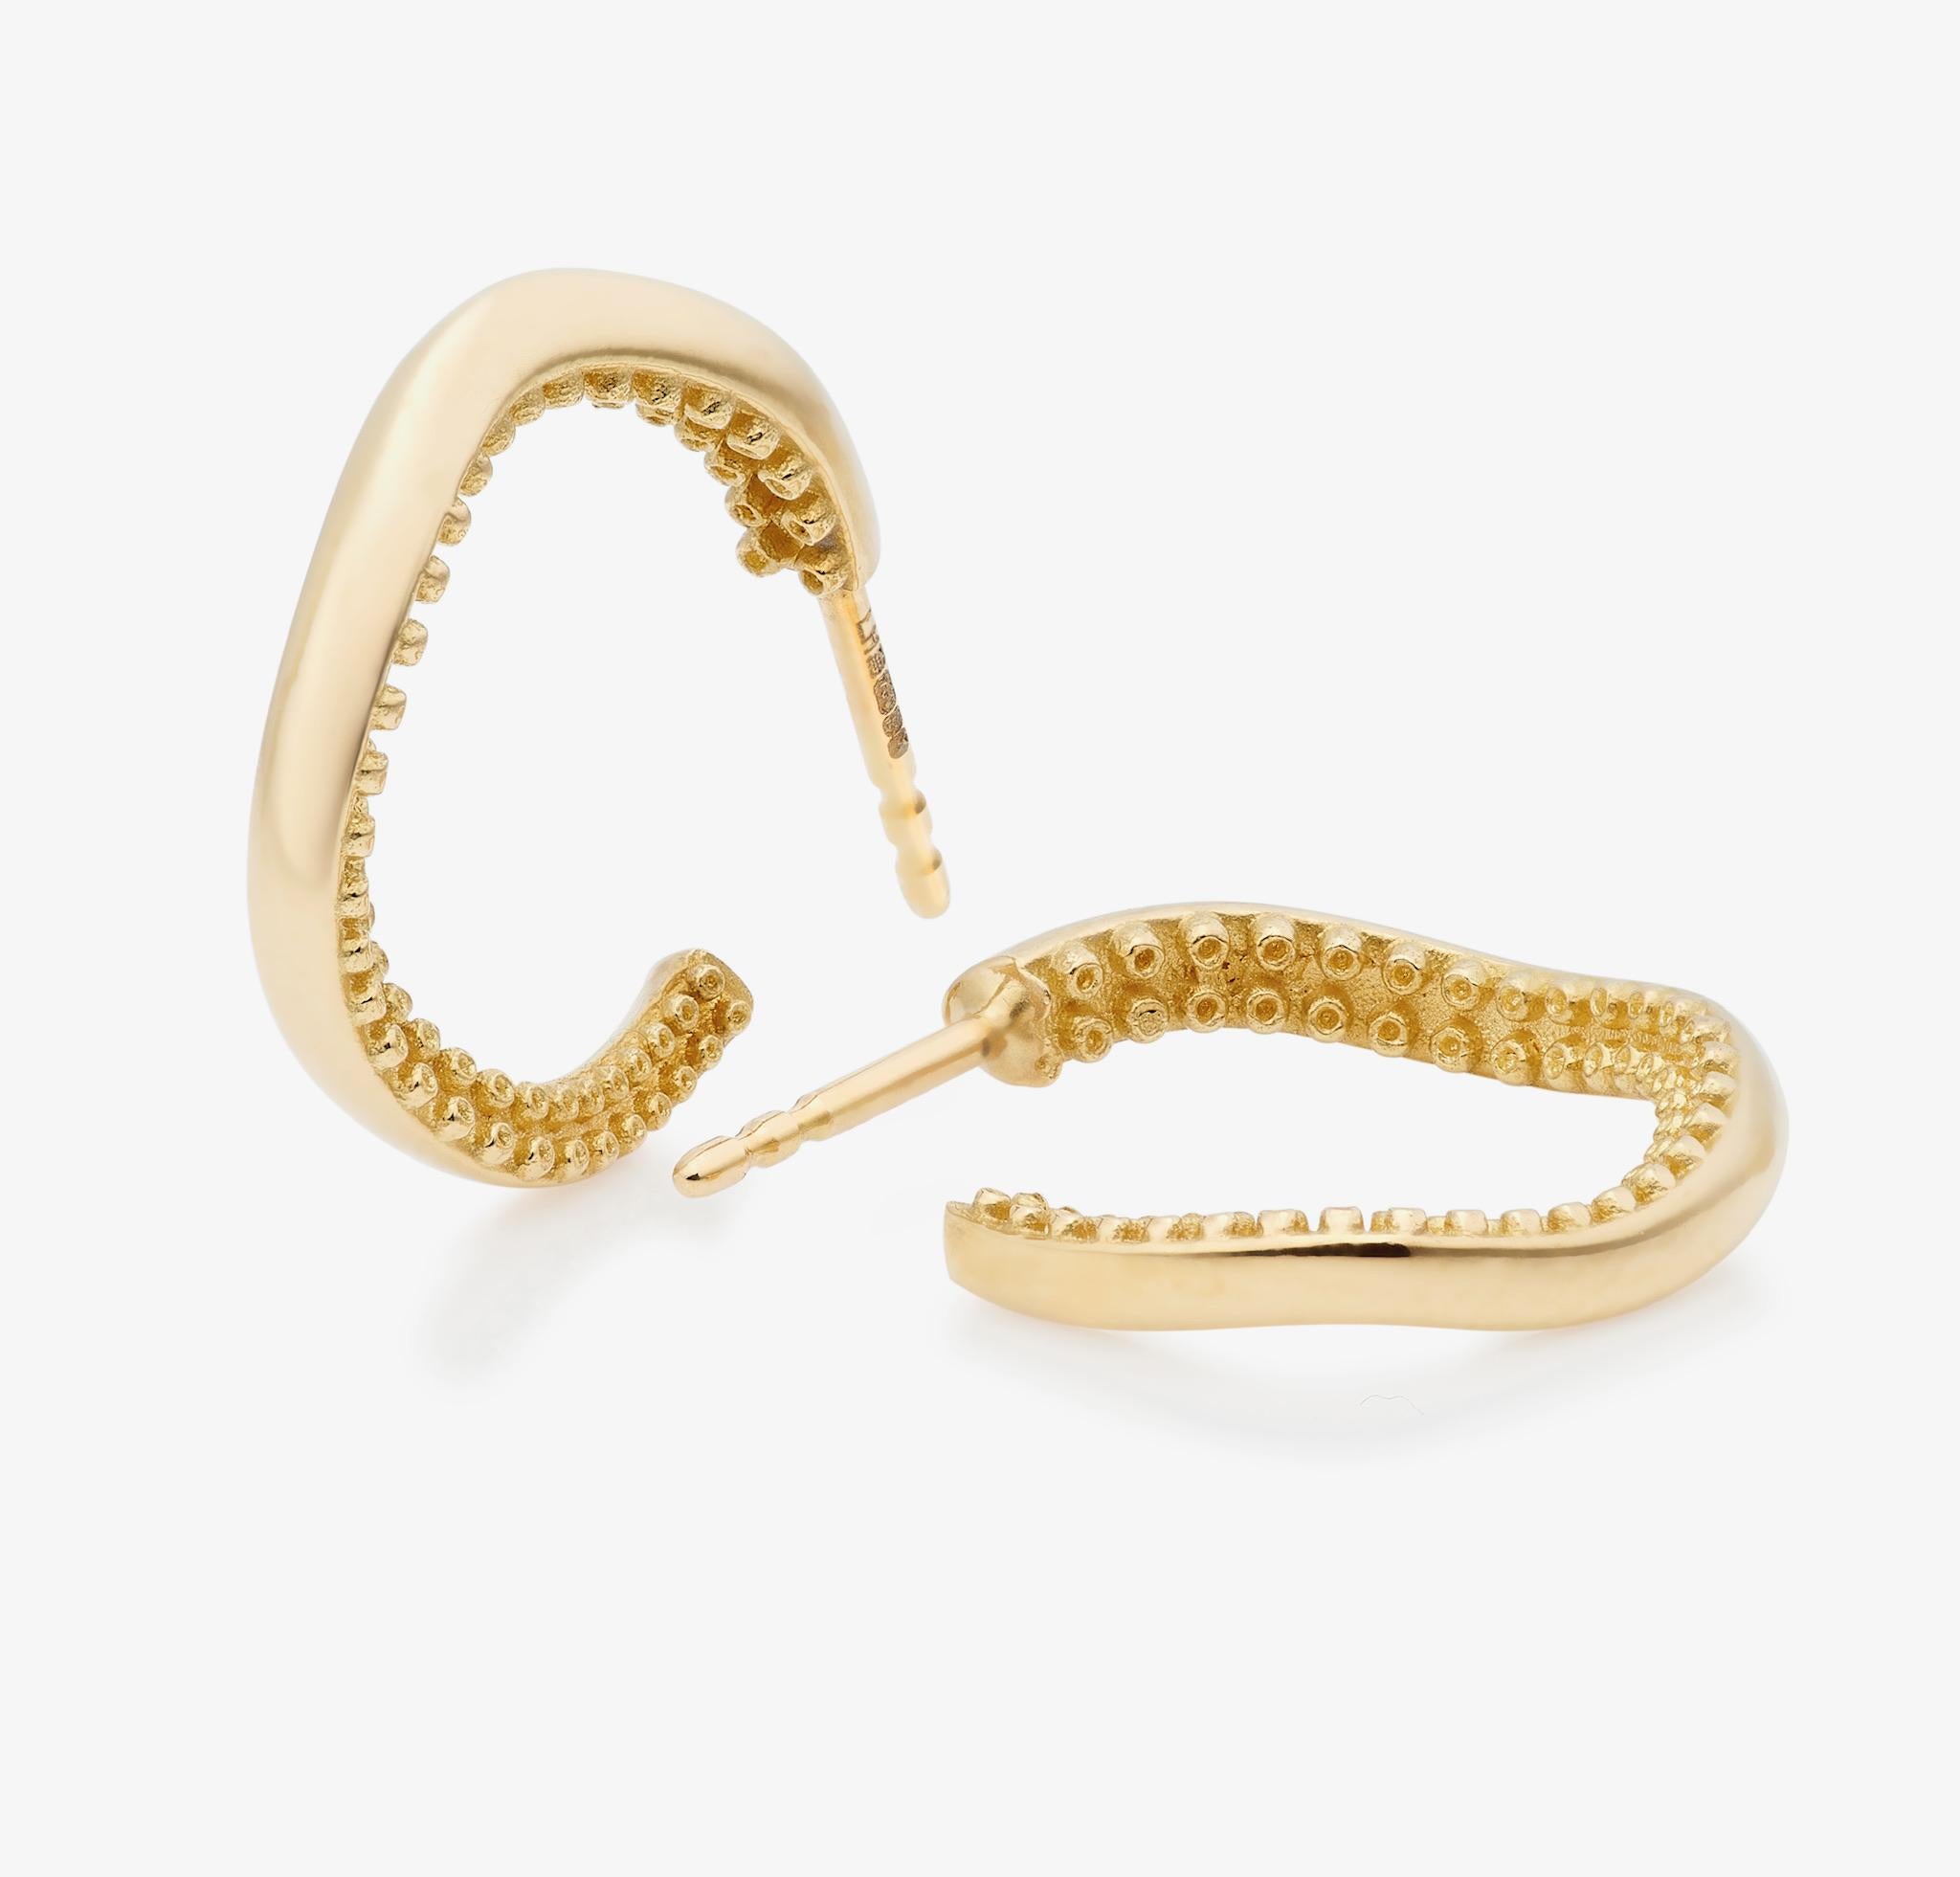 Contemporary Lilly Hastedt Octopus Gold Hoop Earrings For Sale